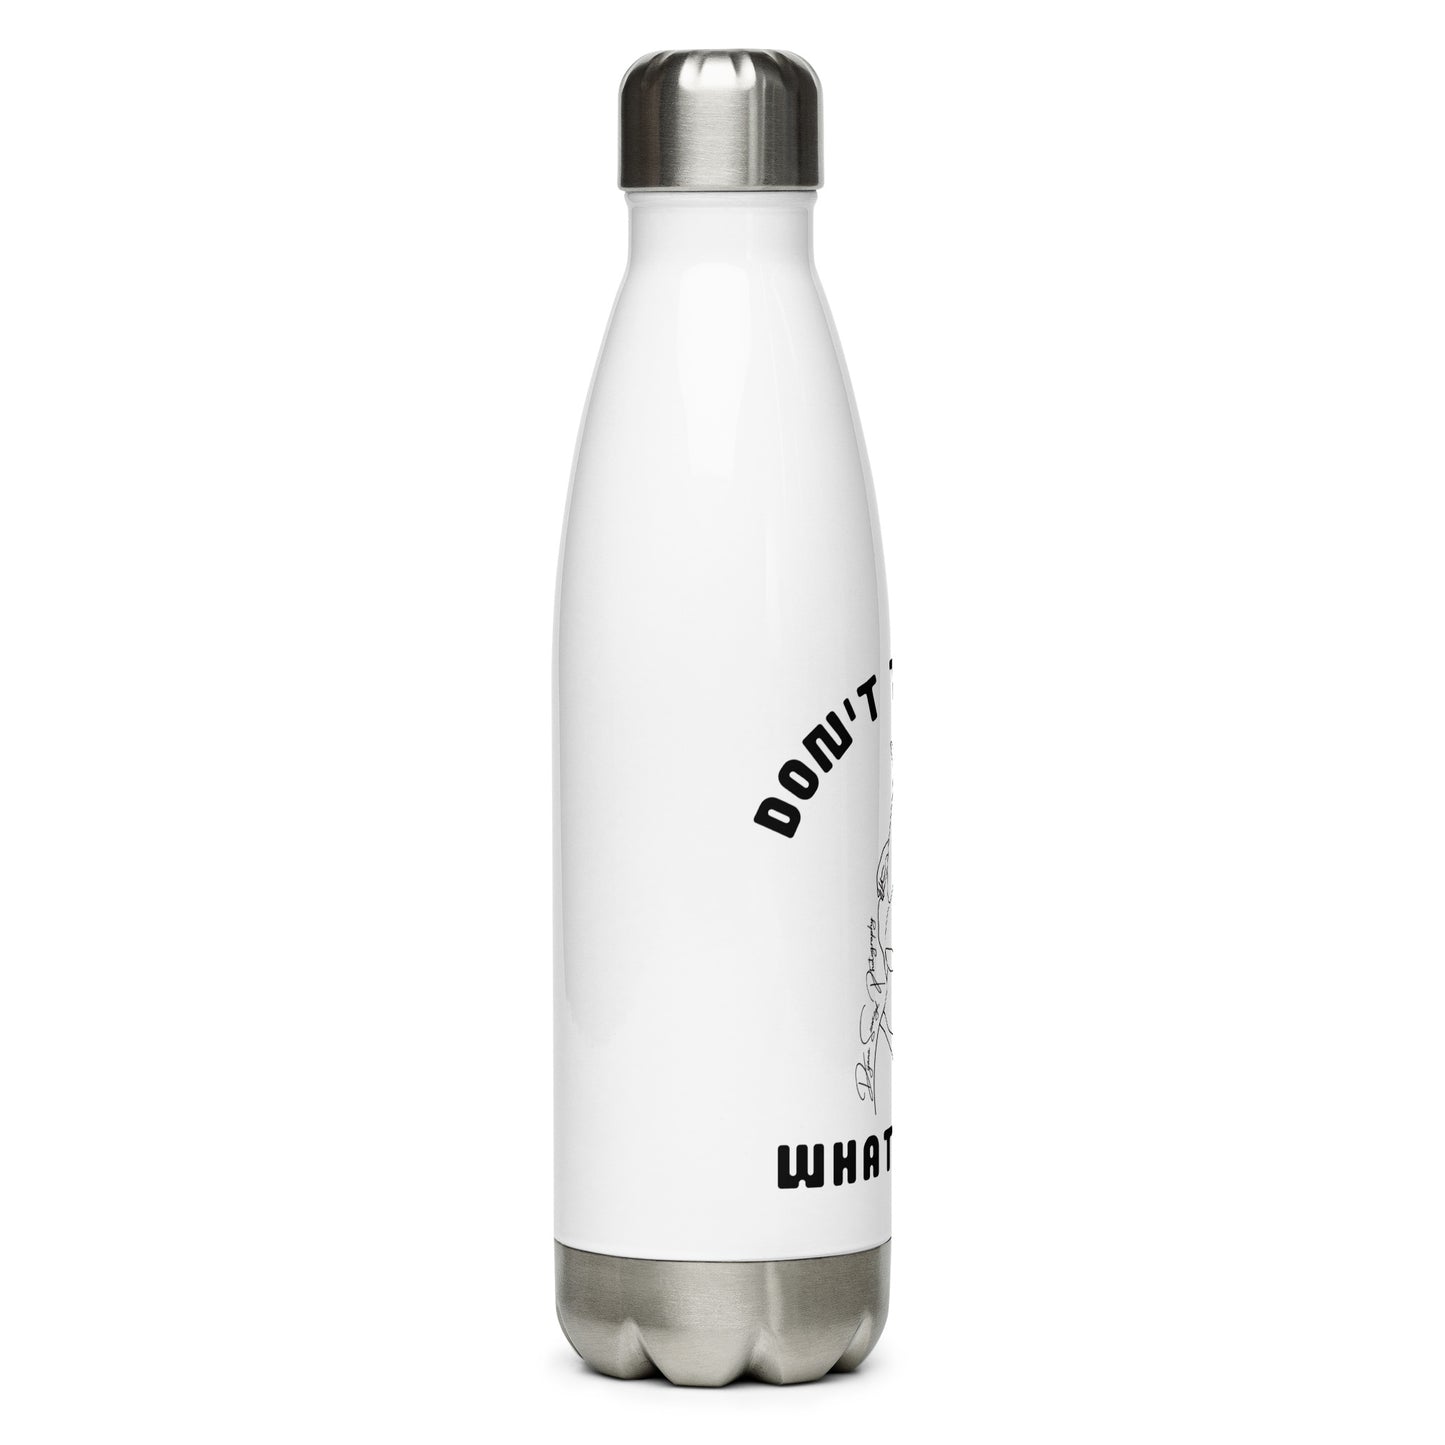 Don't tell me what to do Stainless Steel Water Bottle